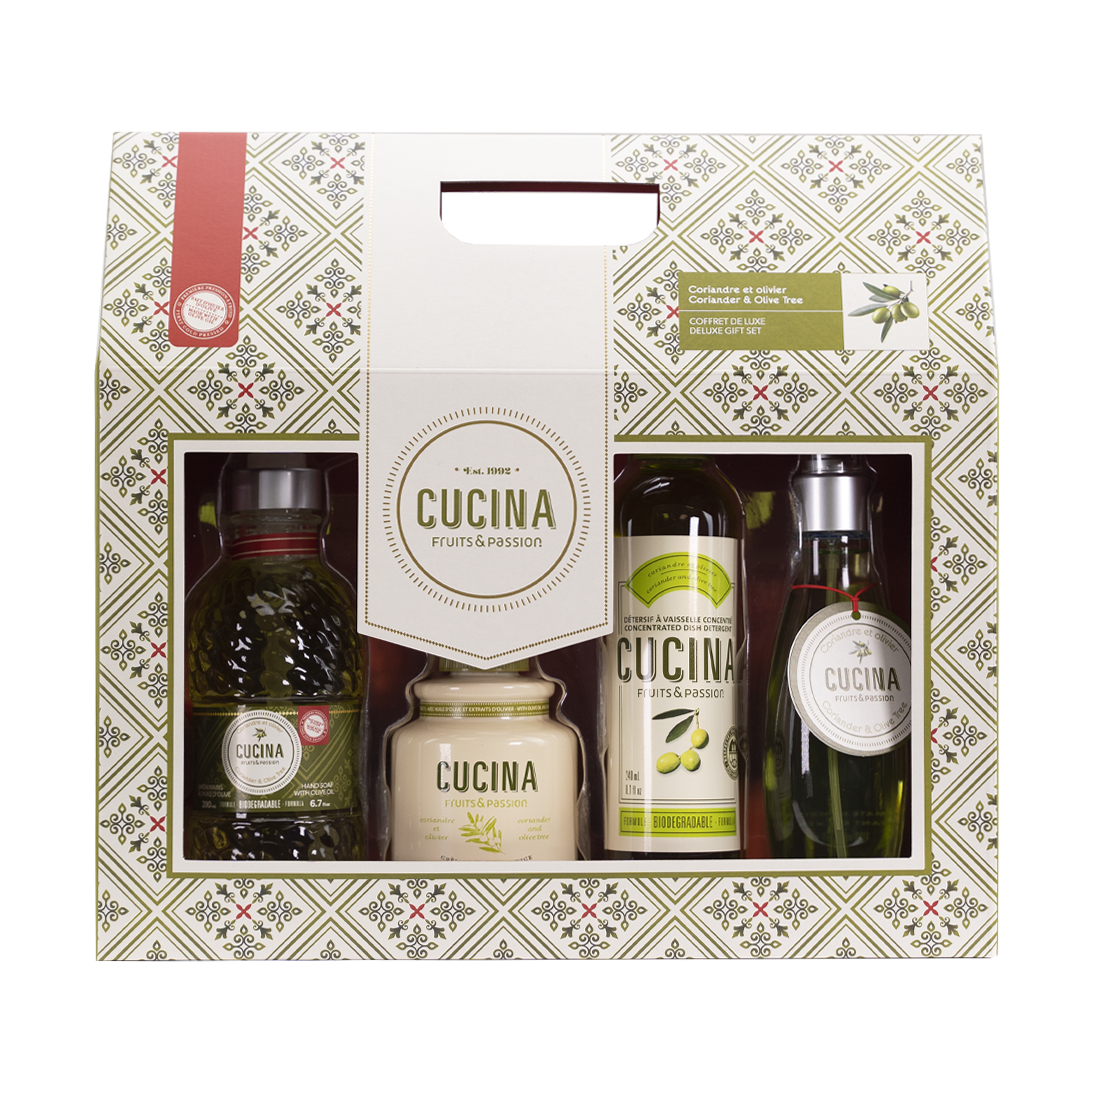 Fruits & Passion Cucina Coriander and Olive Tree Deluxe Kitchen Gift Set